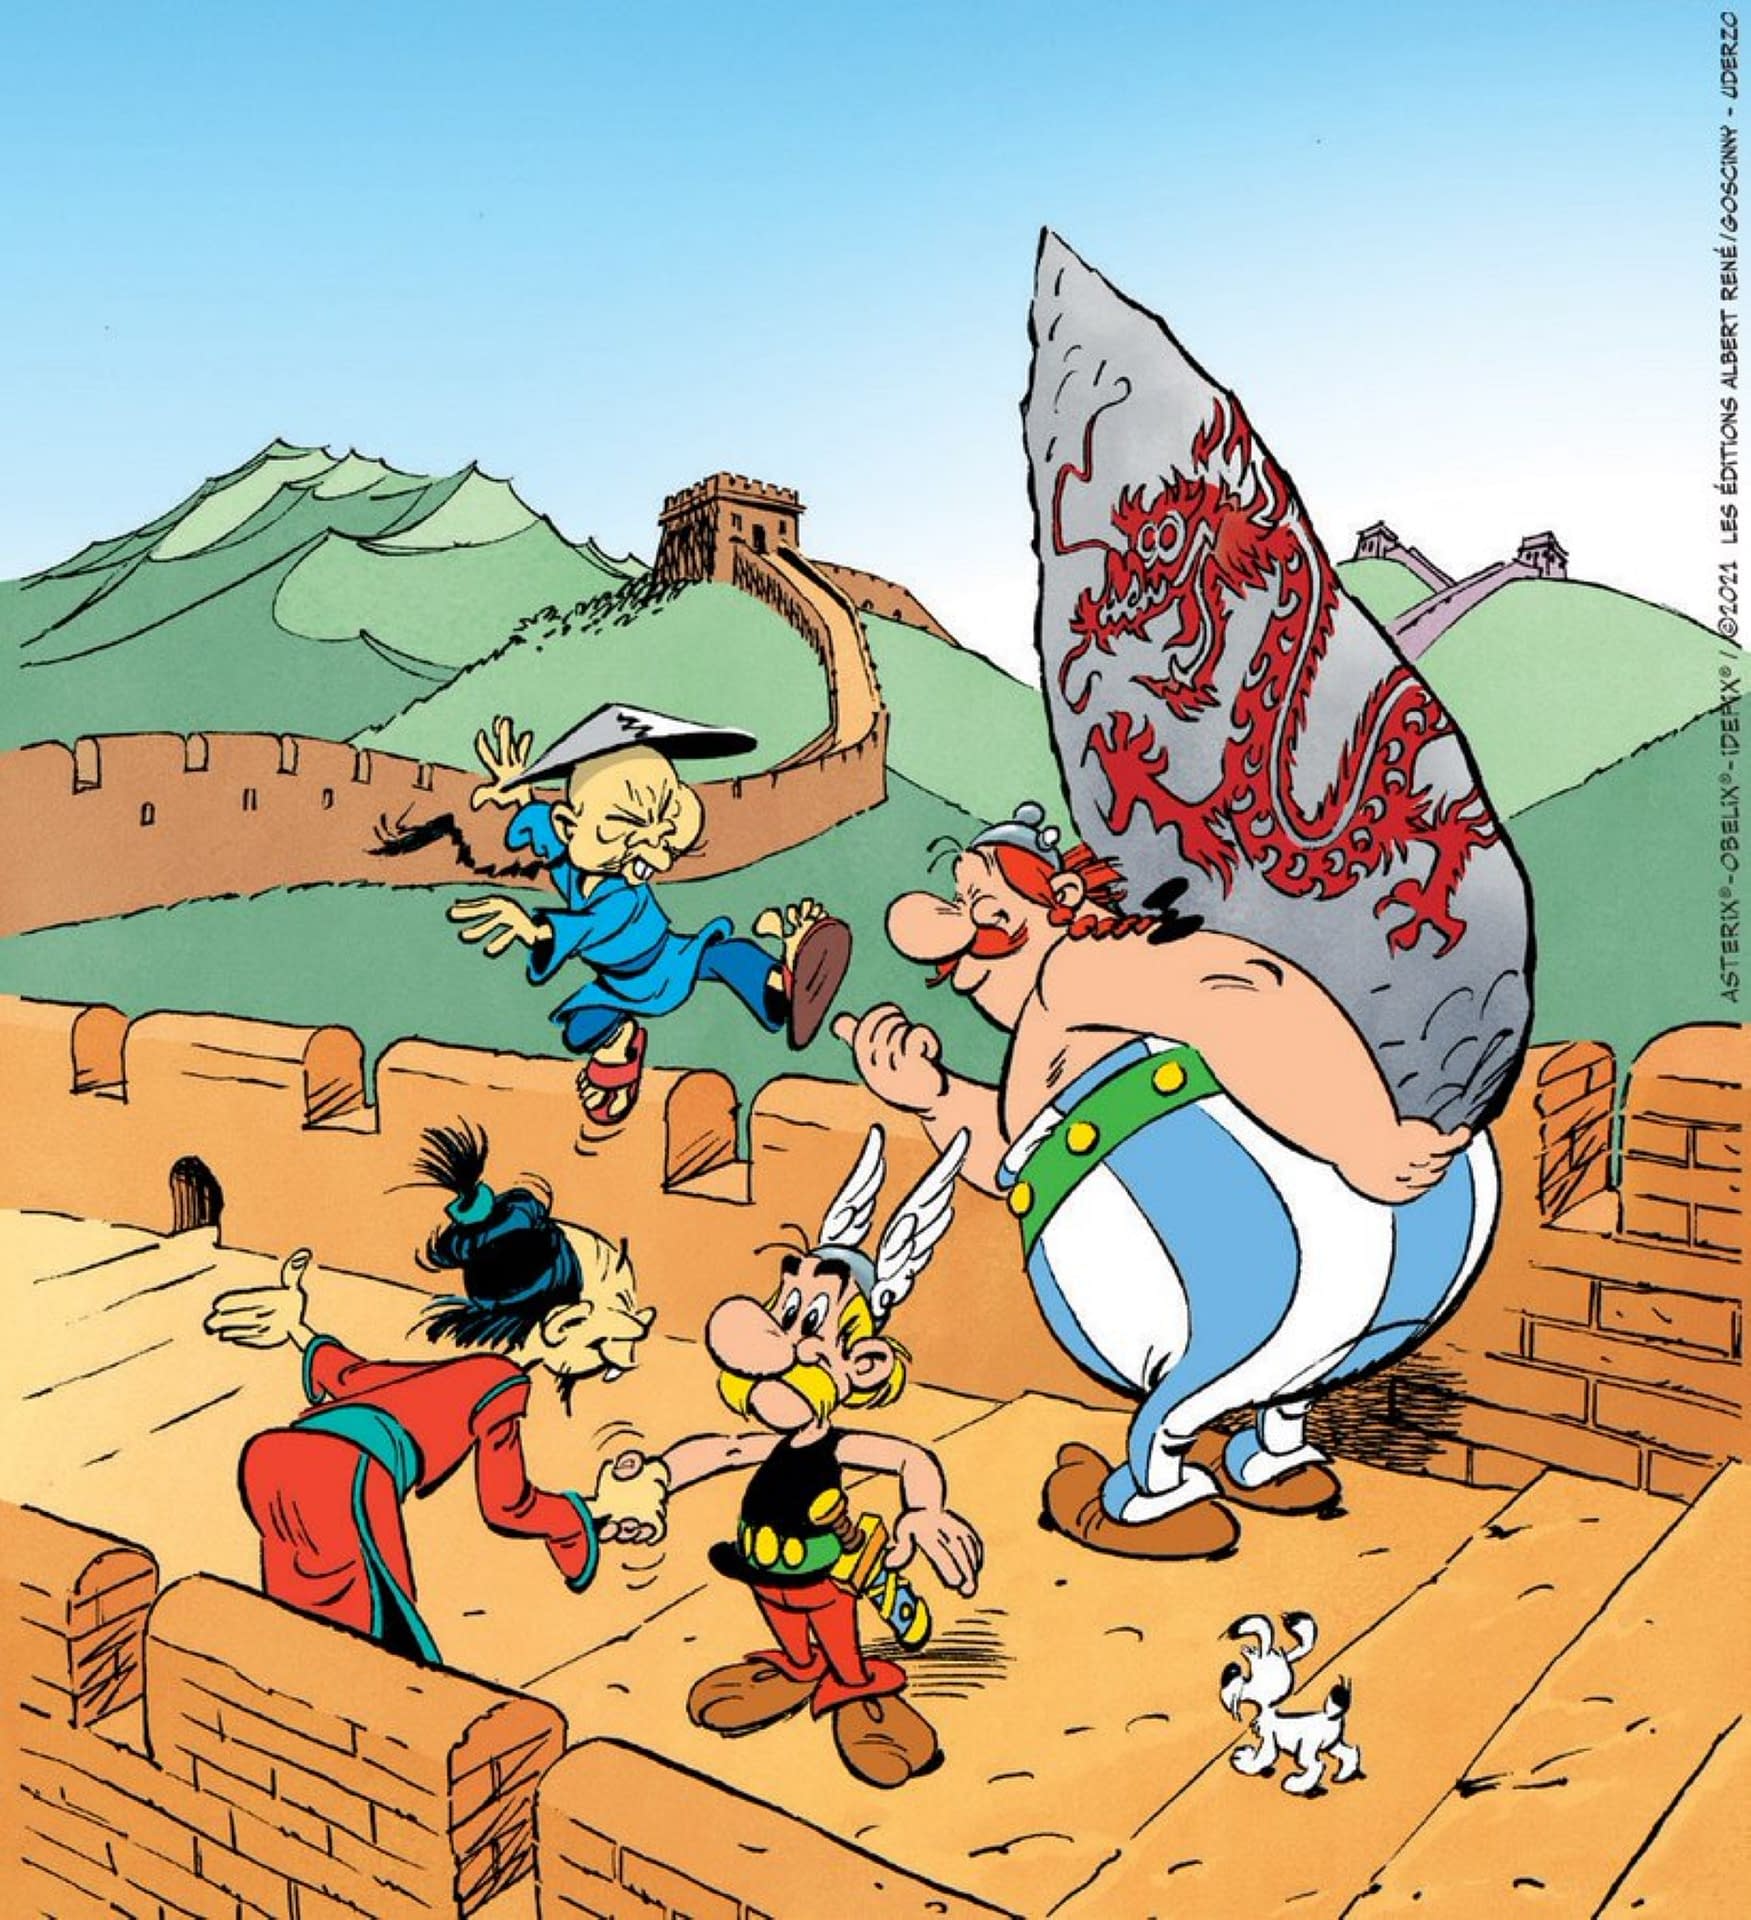 How Fast Was This Asterix Promotional Image Taken Down, By Toutatis?